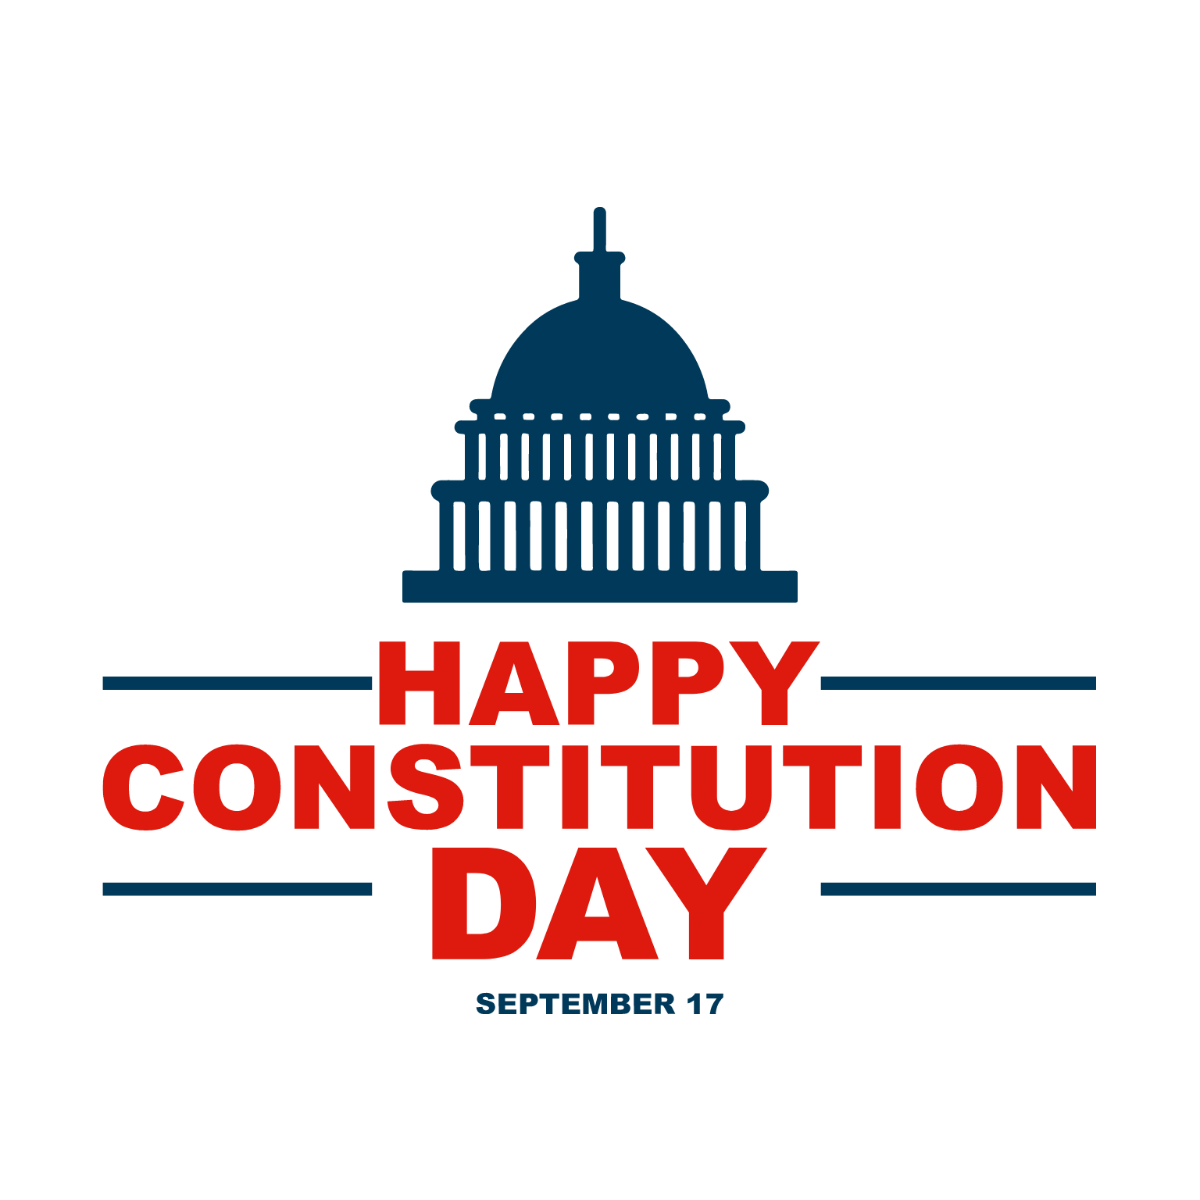 Free Constitution and Citizenship Day Outline Clip Art Template